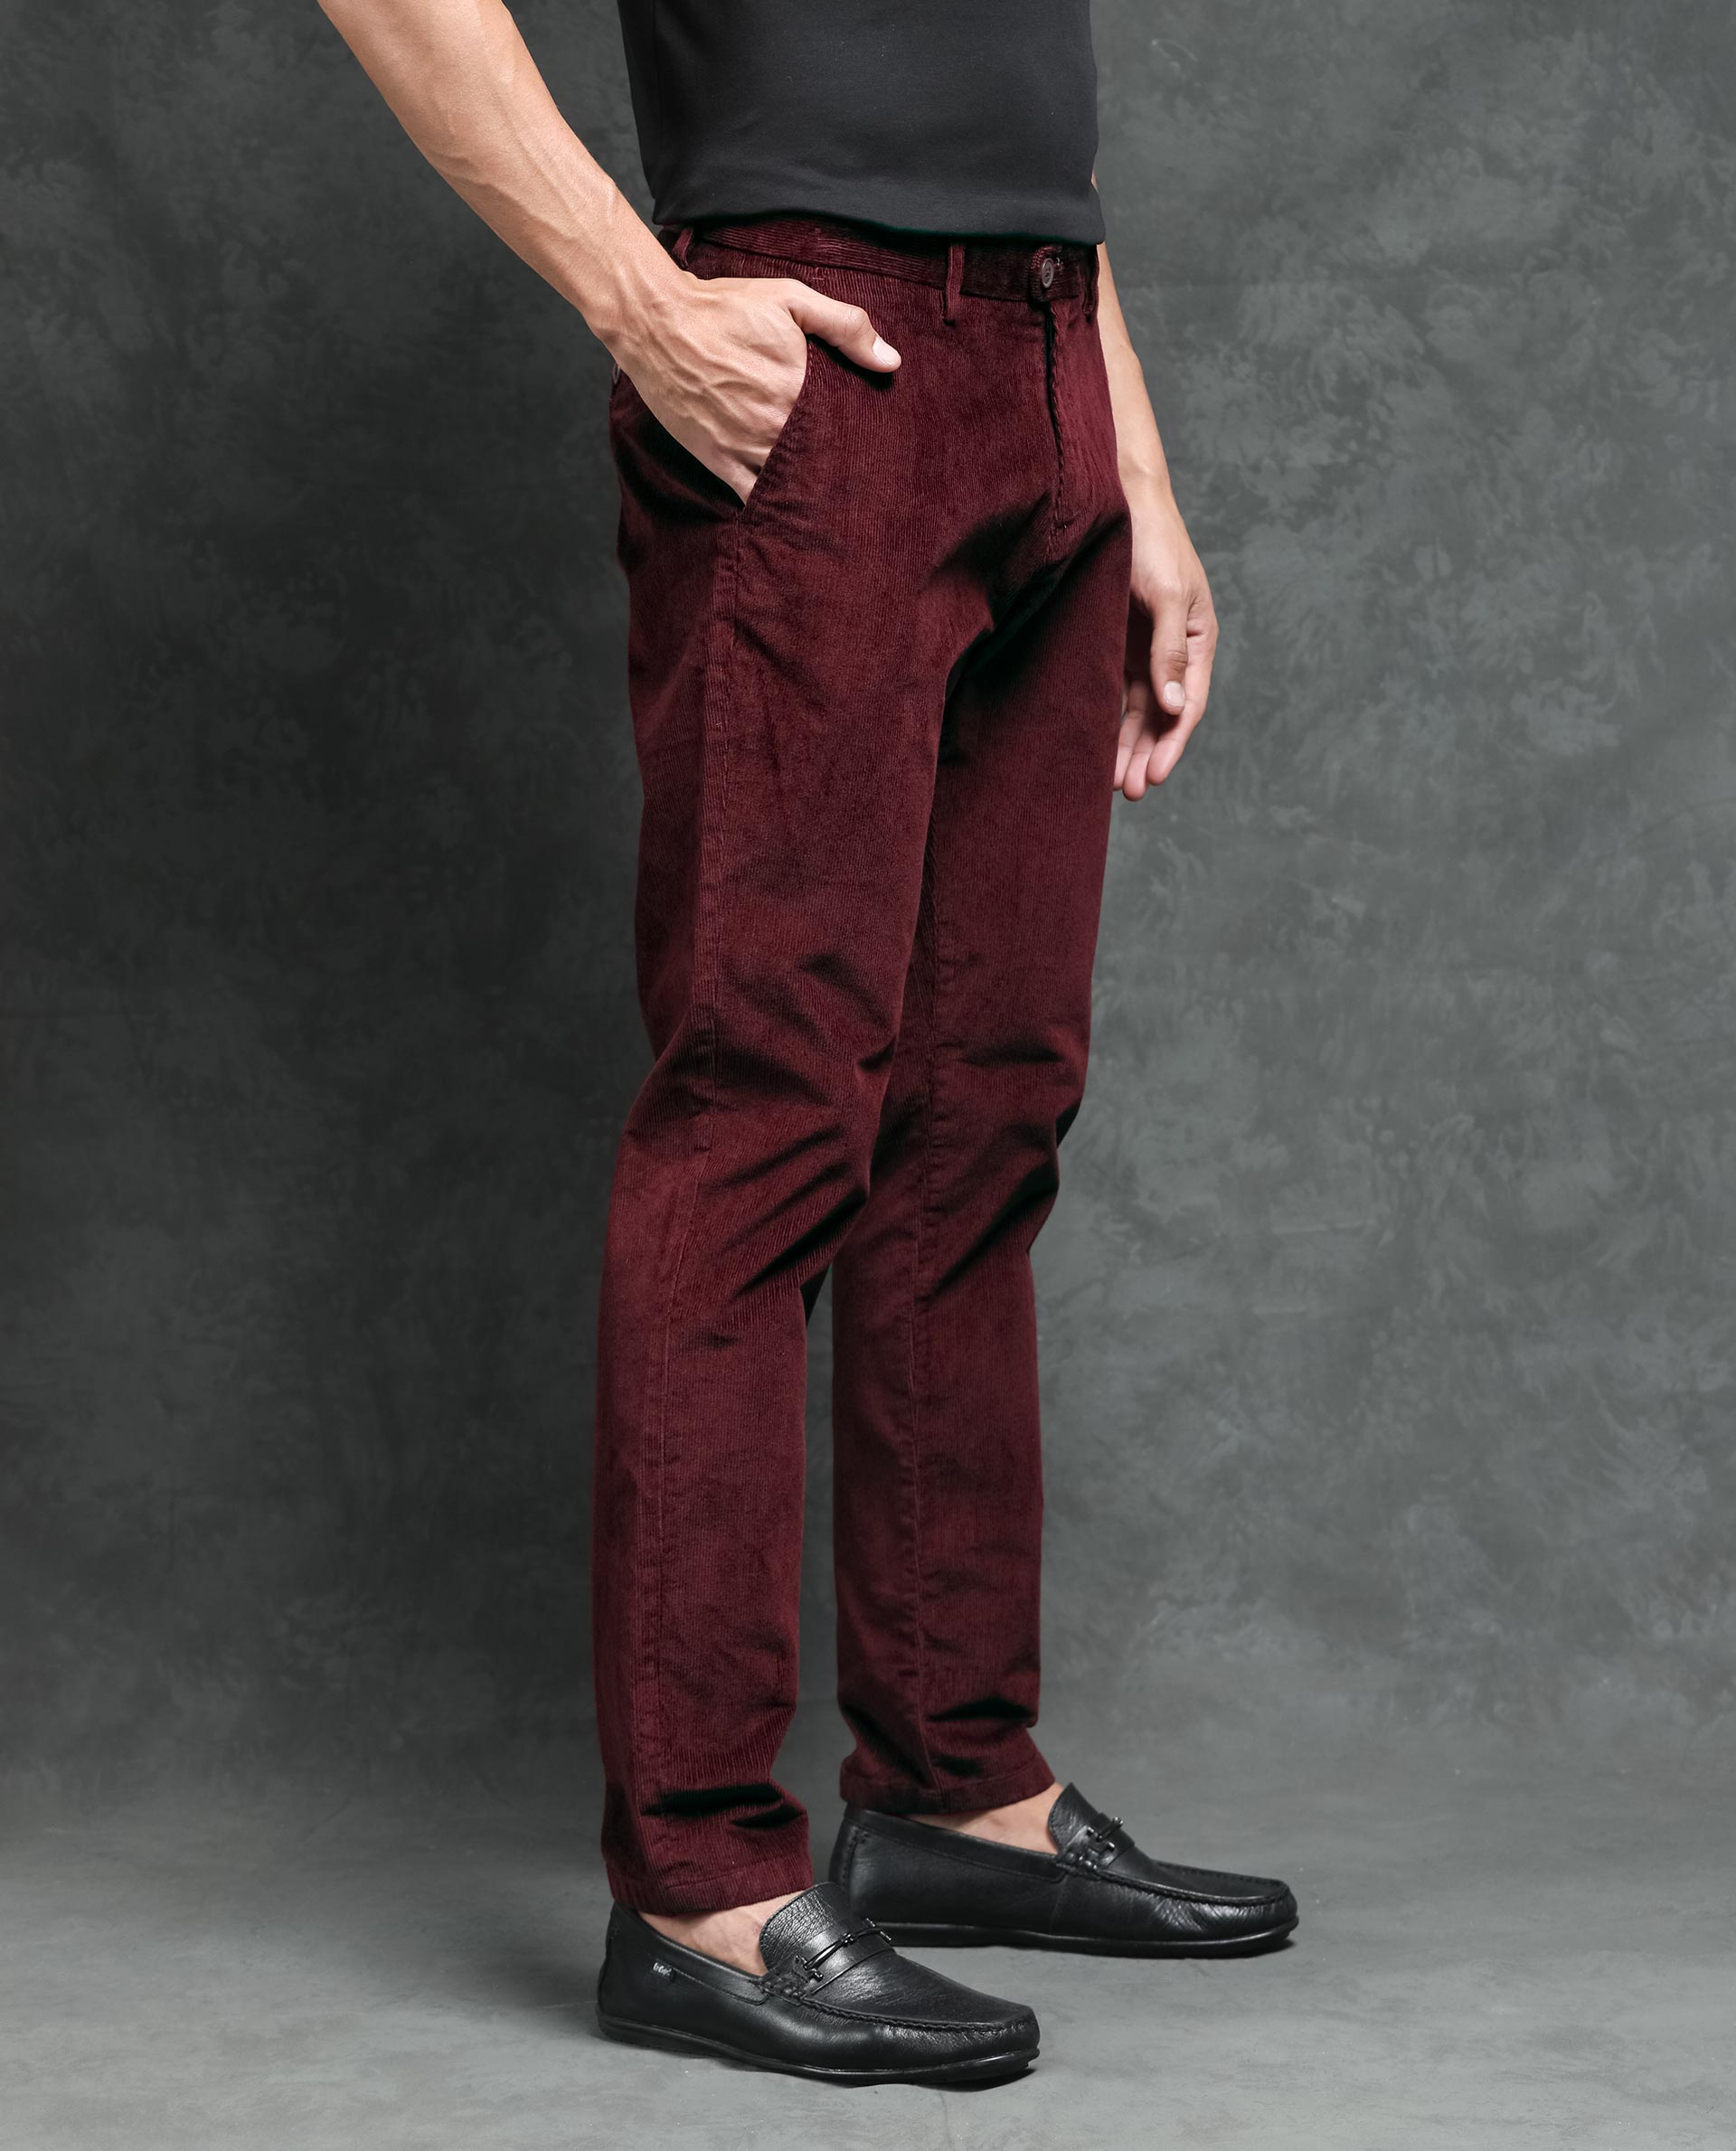 Buy Regular Fit Men Trousers Maroon Poly Cotton Blend for Best Price,  Reviews, Free Shipping